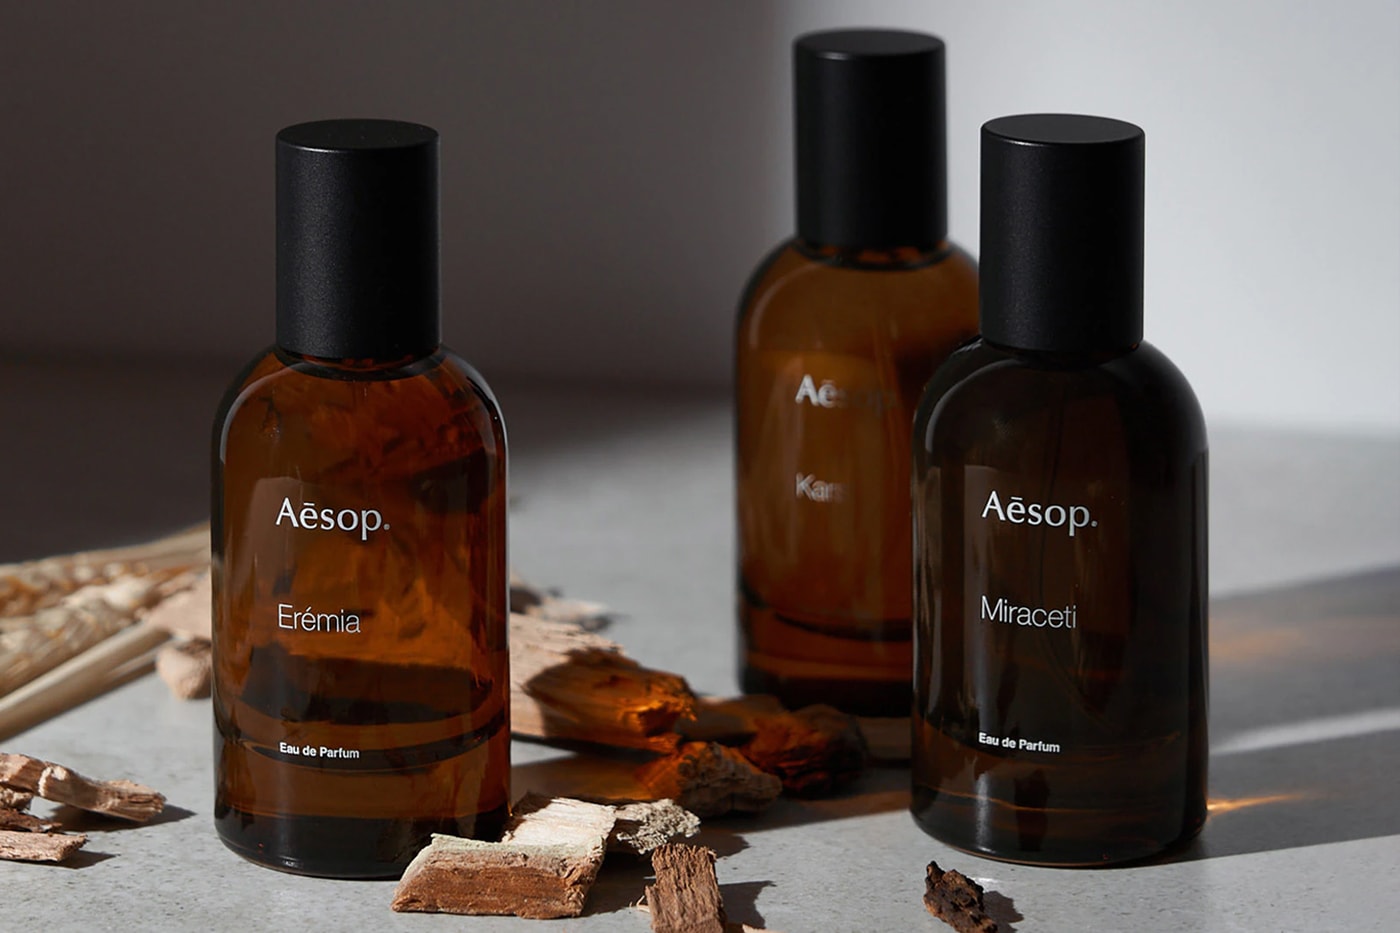 L'Oreal Signs Deal to Acquire Aesop natura & co melbourne australia australian skin care brand plant-based ingredients body care hair care products beauty china loreal luxe Lancôme, Yves Saint Laurent, Helena Rubinstein, Kiehl's and Mugler.